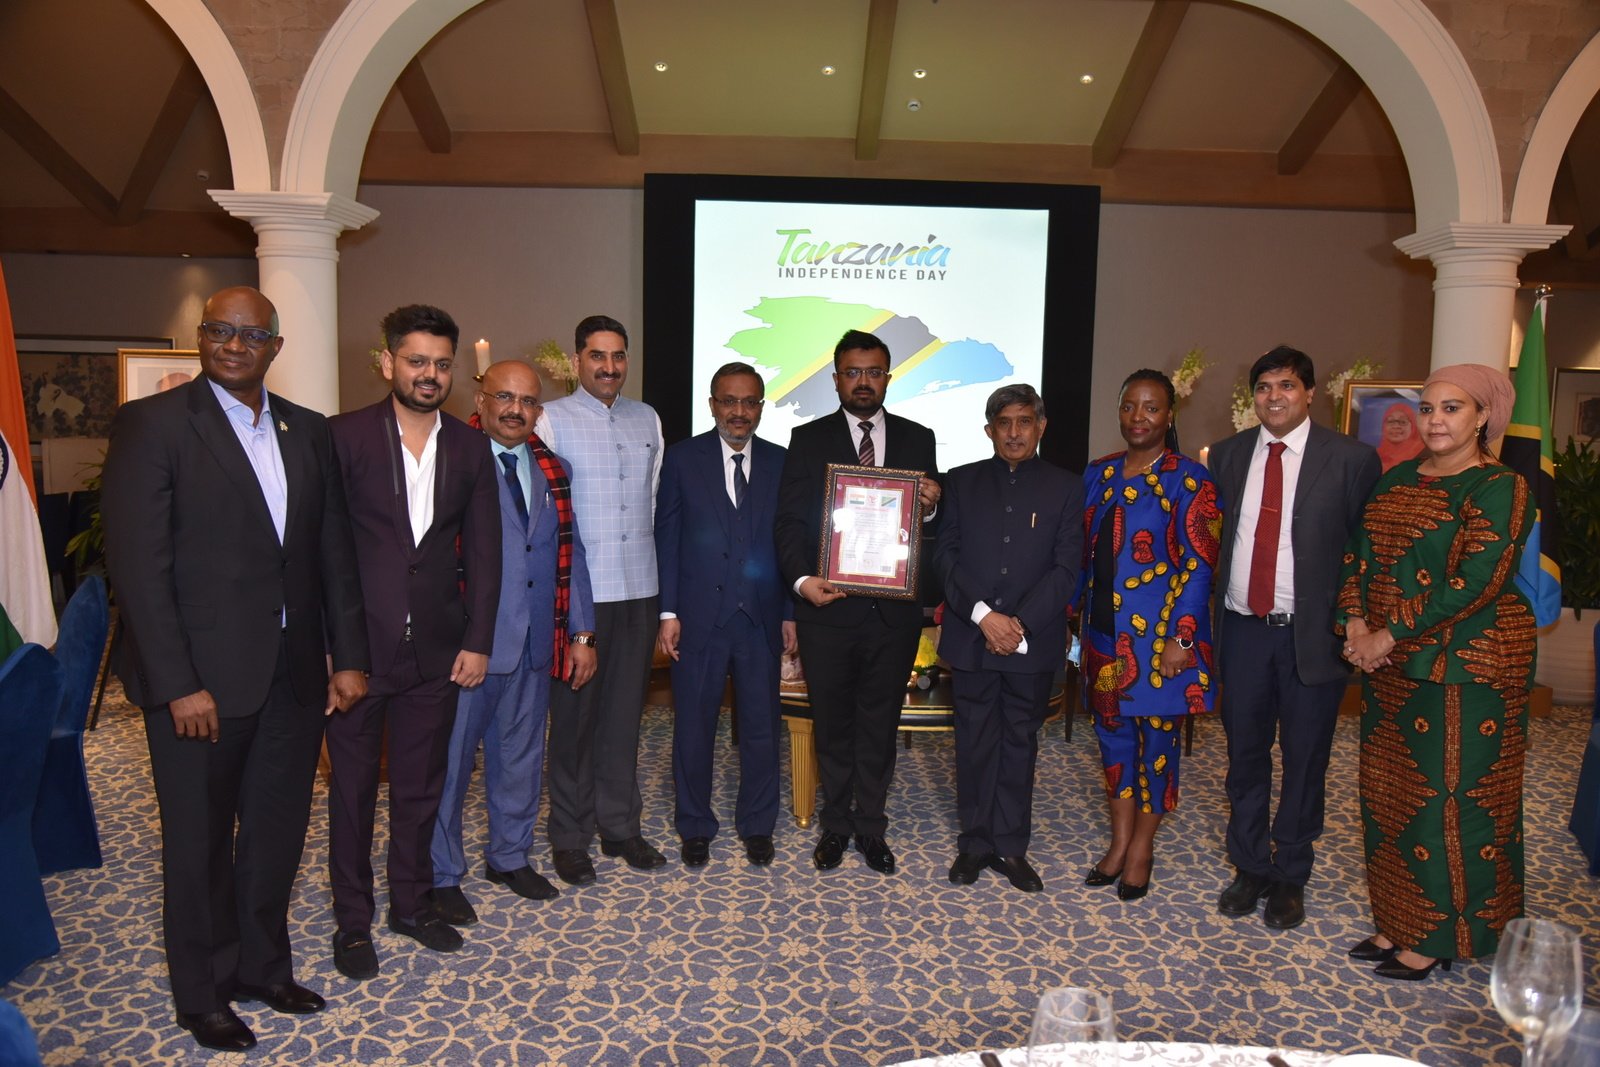 Mr. Anuj Agarwal with the Delegates at the Tanzanian Independence Day Celebrations